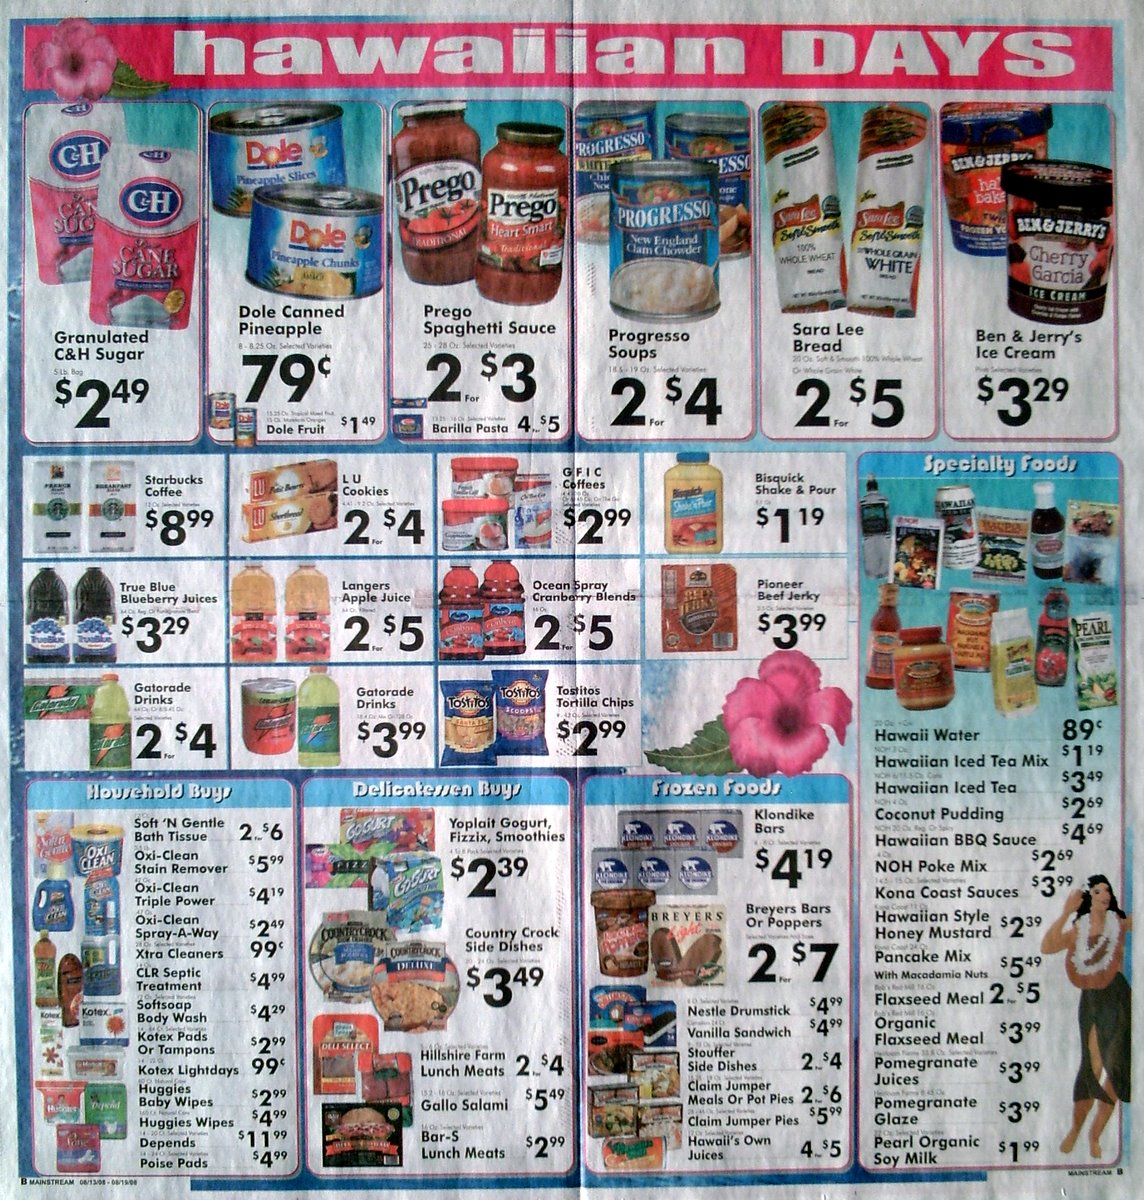 Big Trees Market Weekly Ad for August 13-19, 2008